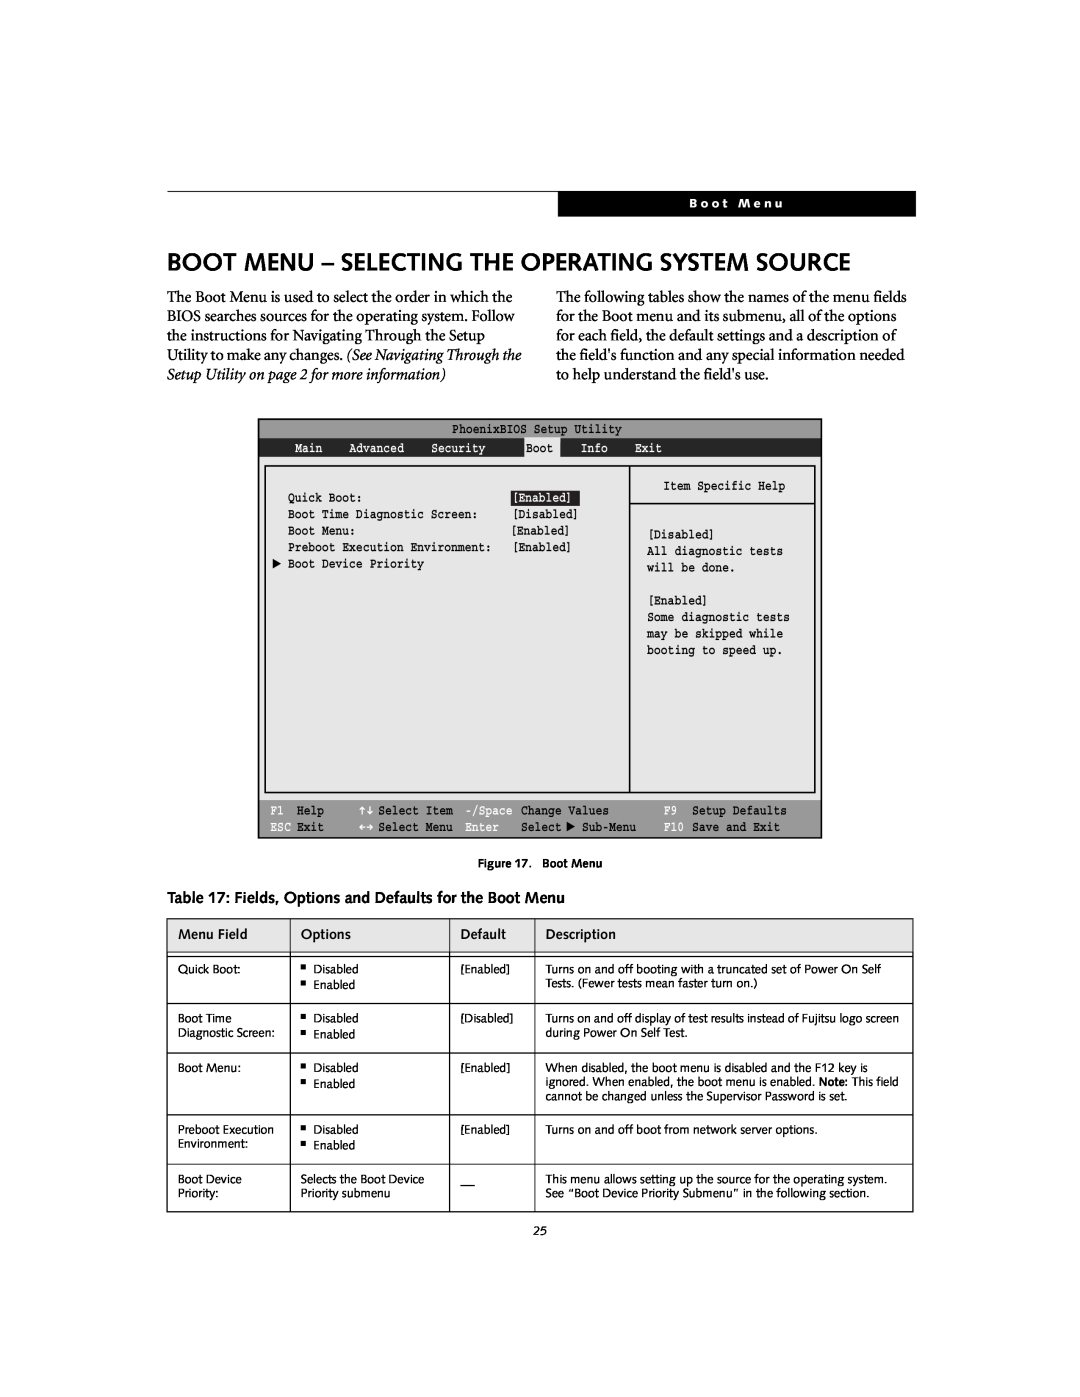 Fujitsu S7020D Boot Menu - Selecting The Operating System Source, Fields, Options and Defaults for the Boot Menu, Main 